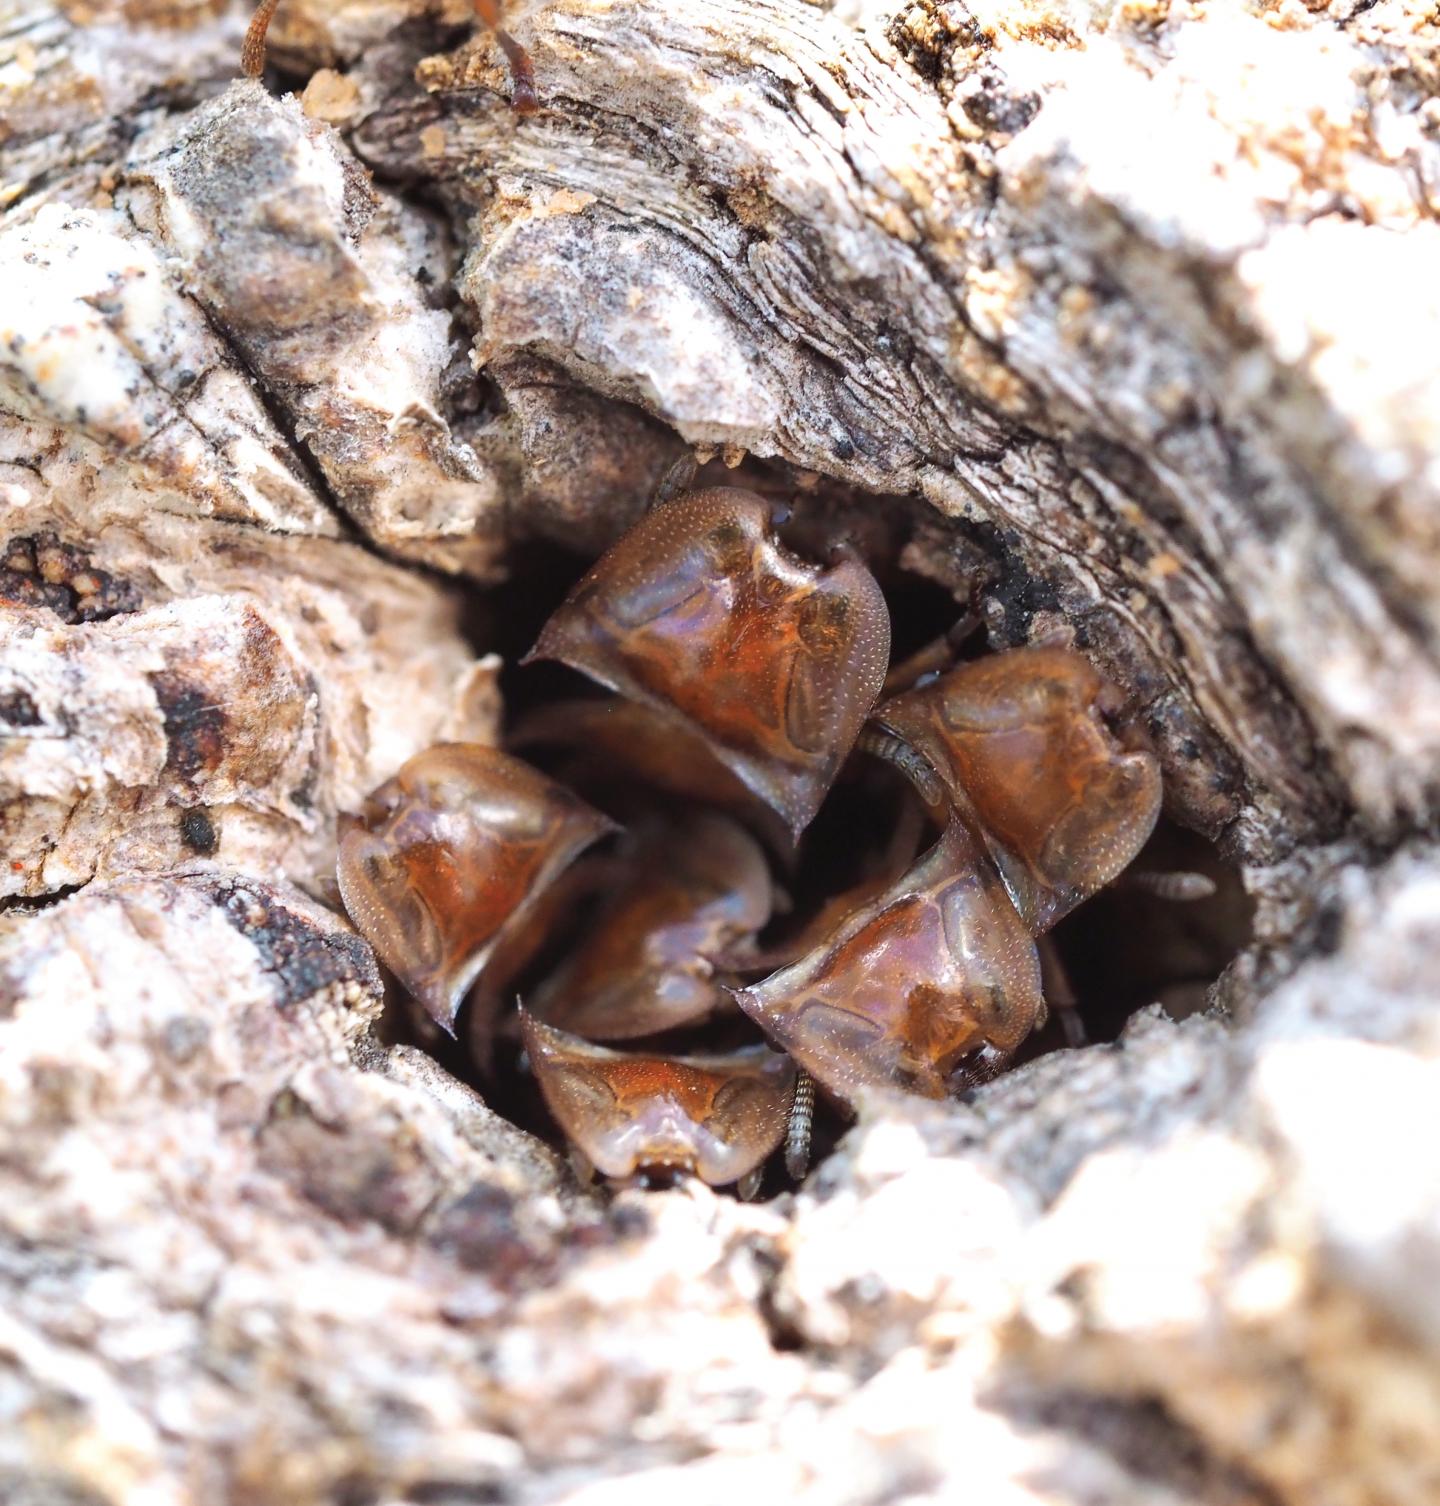 Soldiers and Workers of the Turtle Ant Combine Their Armored Heads to Group-Defend Their Nest Entran